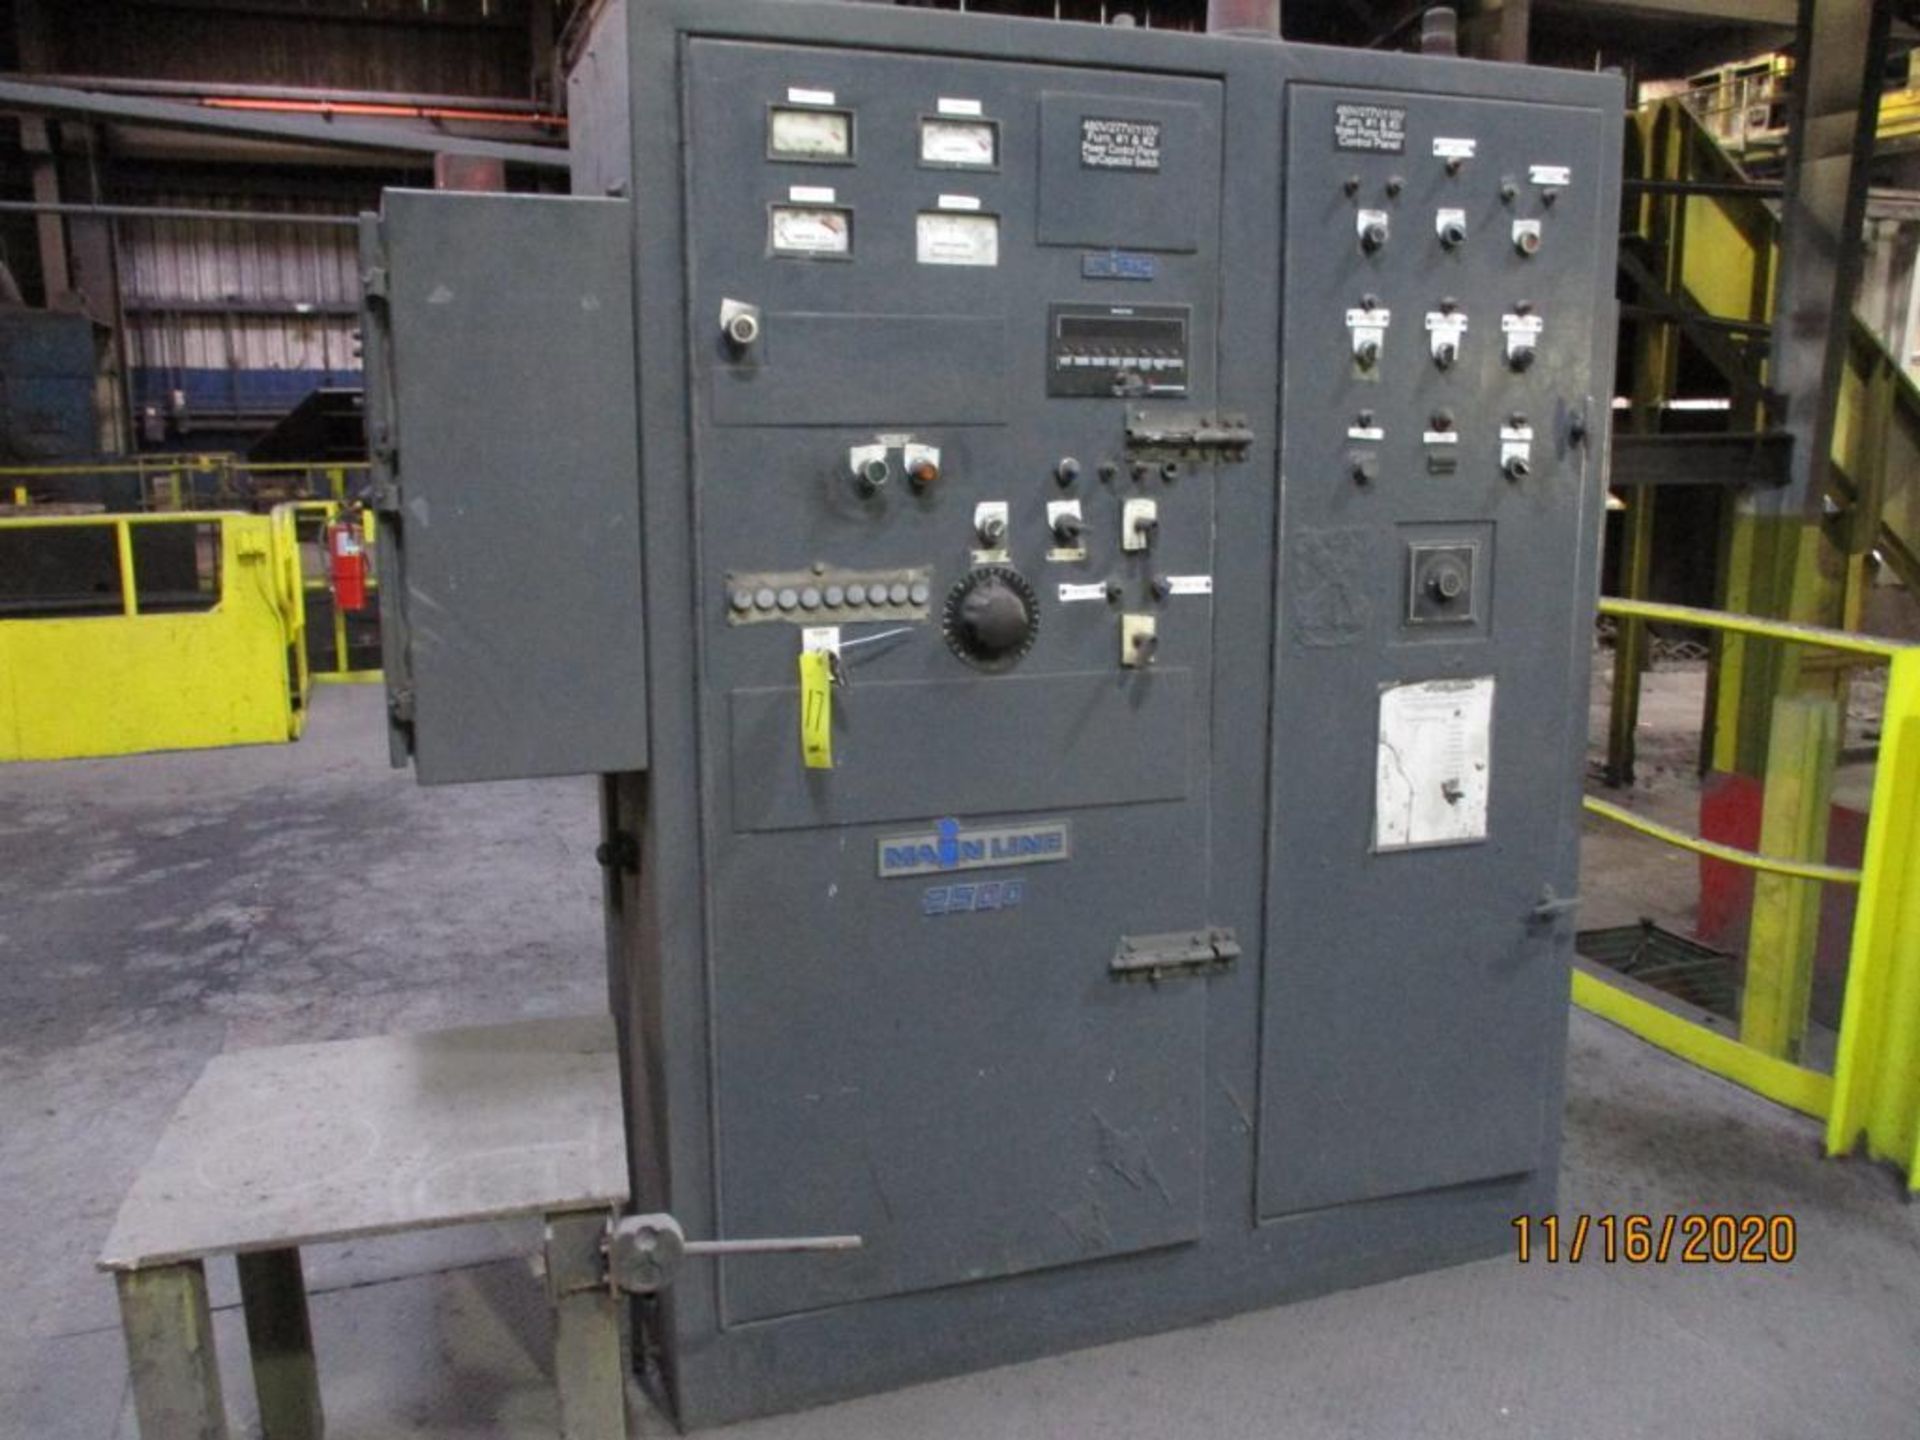 Inductotherm Mainline Furnace, 7000 kw, 60 Hz, 10 Ton Capacity, (2) Shells, Accessories on Deck, - Image 5 of 10